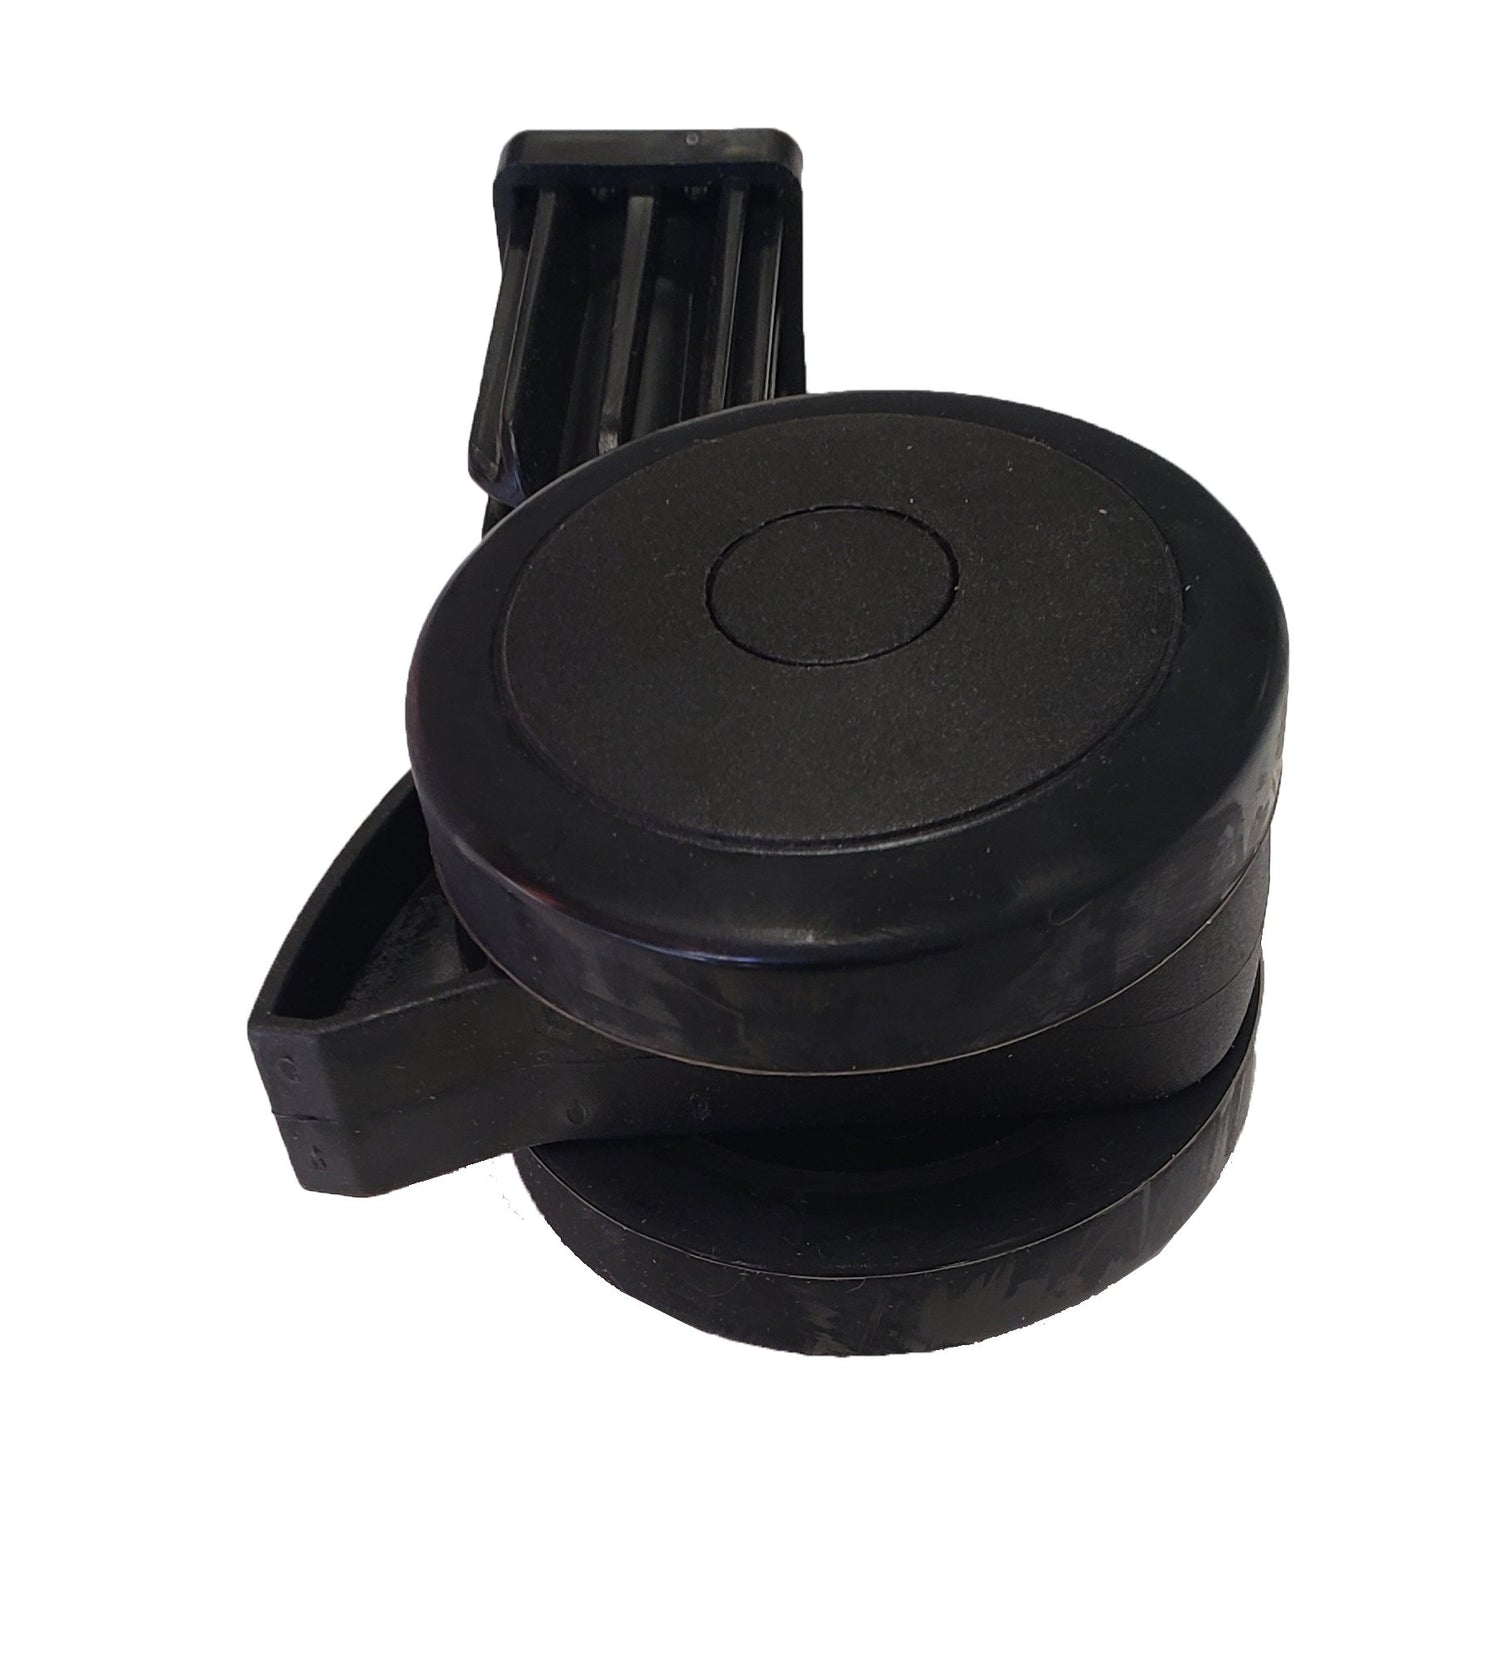 Weber 70359 Replacement Caster & Insert | Available to order in-store and online with Barbecues Galore. Stop by any of our 5 locations: Burlington, Oakville, Etobicoke & Calgary. We have all of your Bbq, patio, accessory and parts needs.